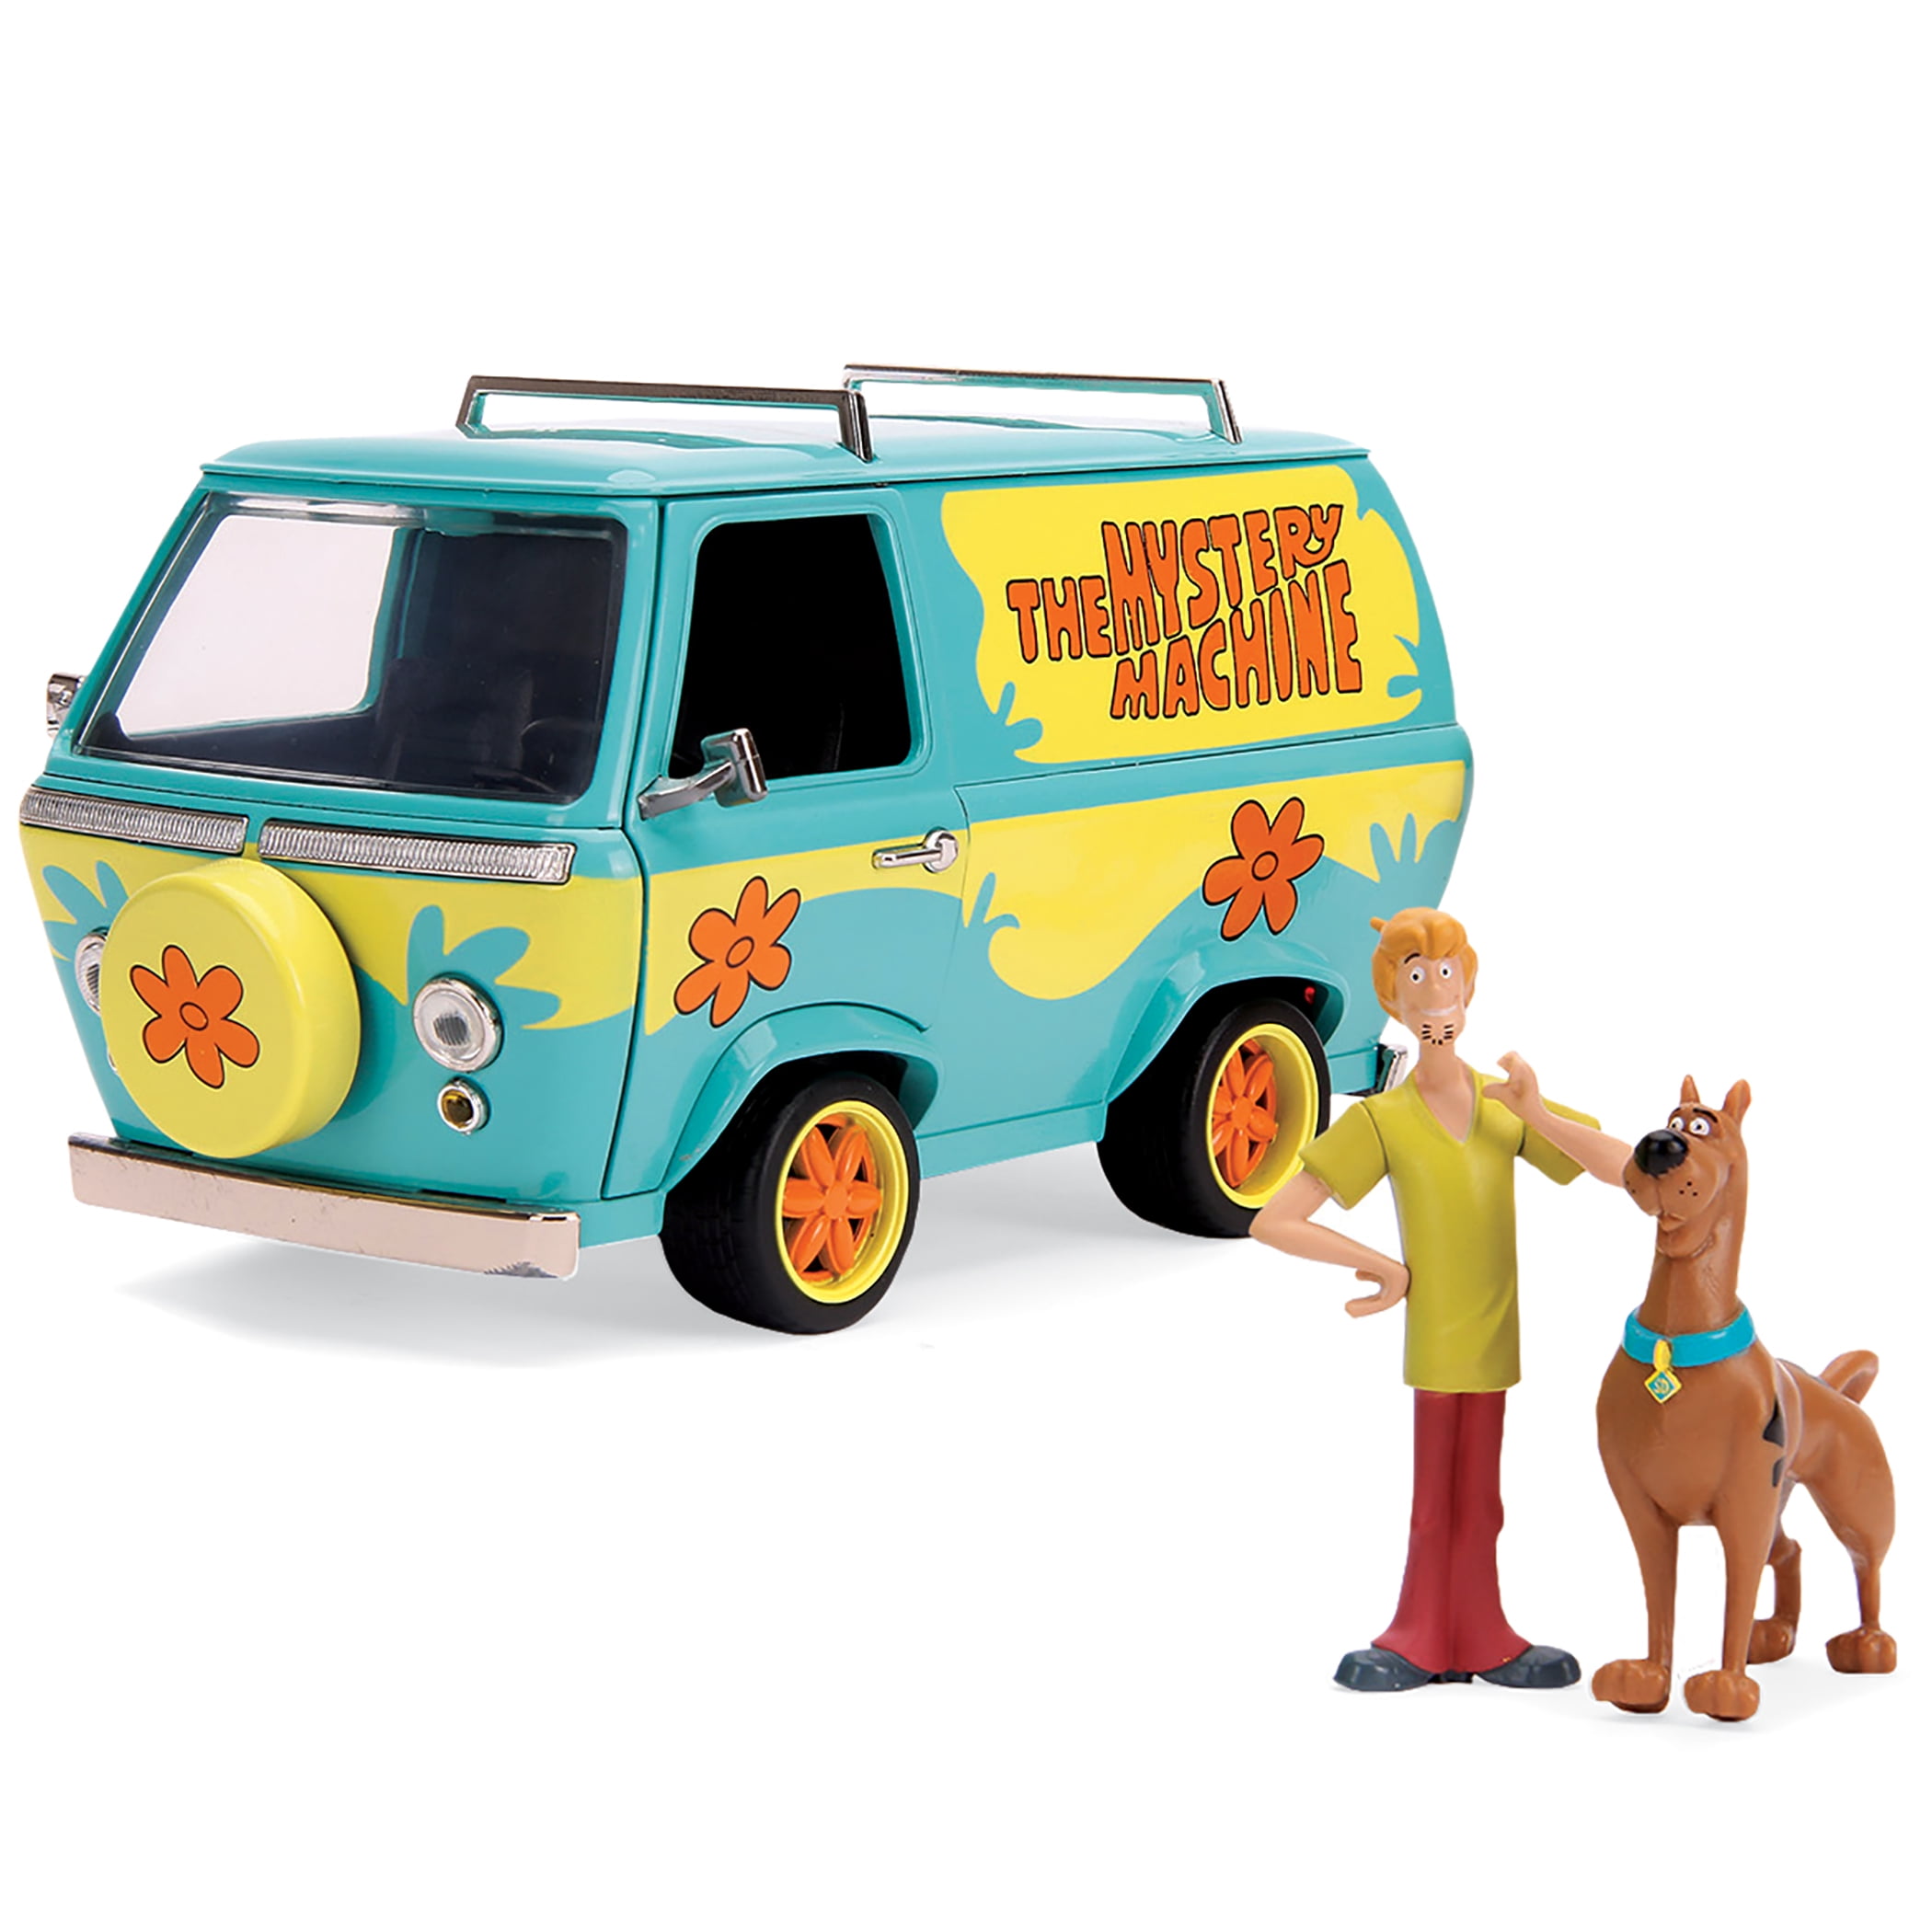 Scooby Doo Scooby & Shaggy &Mystery Machine & 1:24 Die-cast Play Vehicles -  